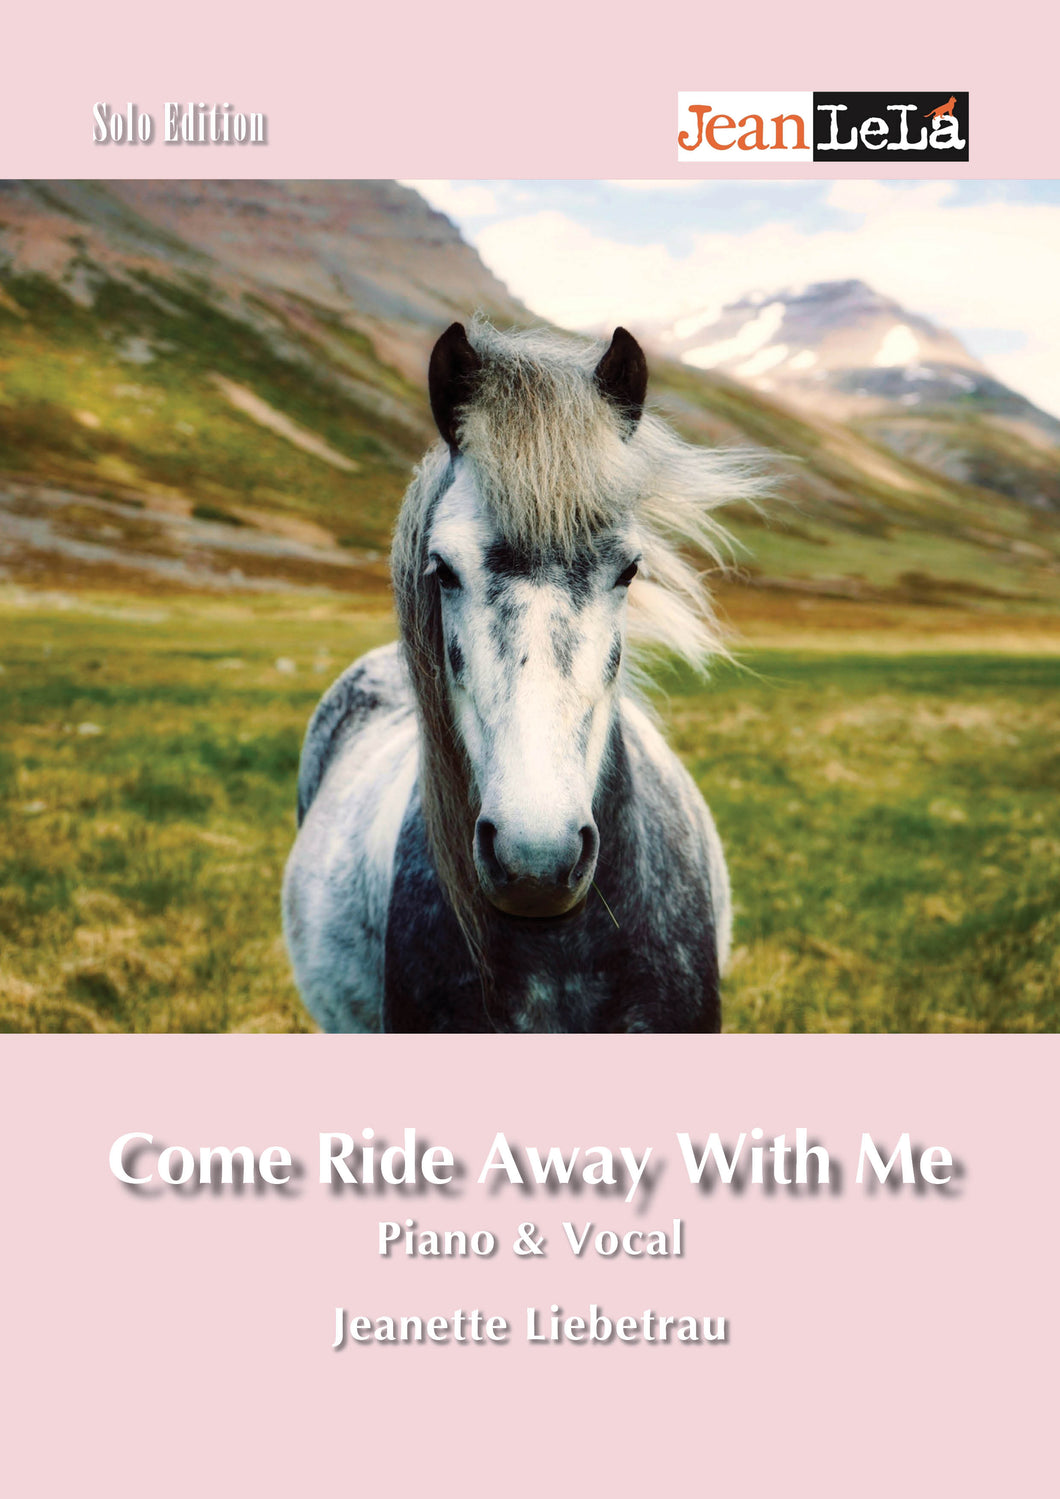 LeLá, Jean: Come Ride Away With Me - Sheet Music Download